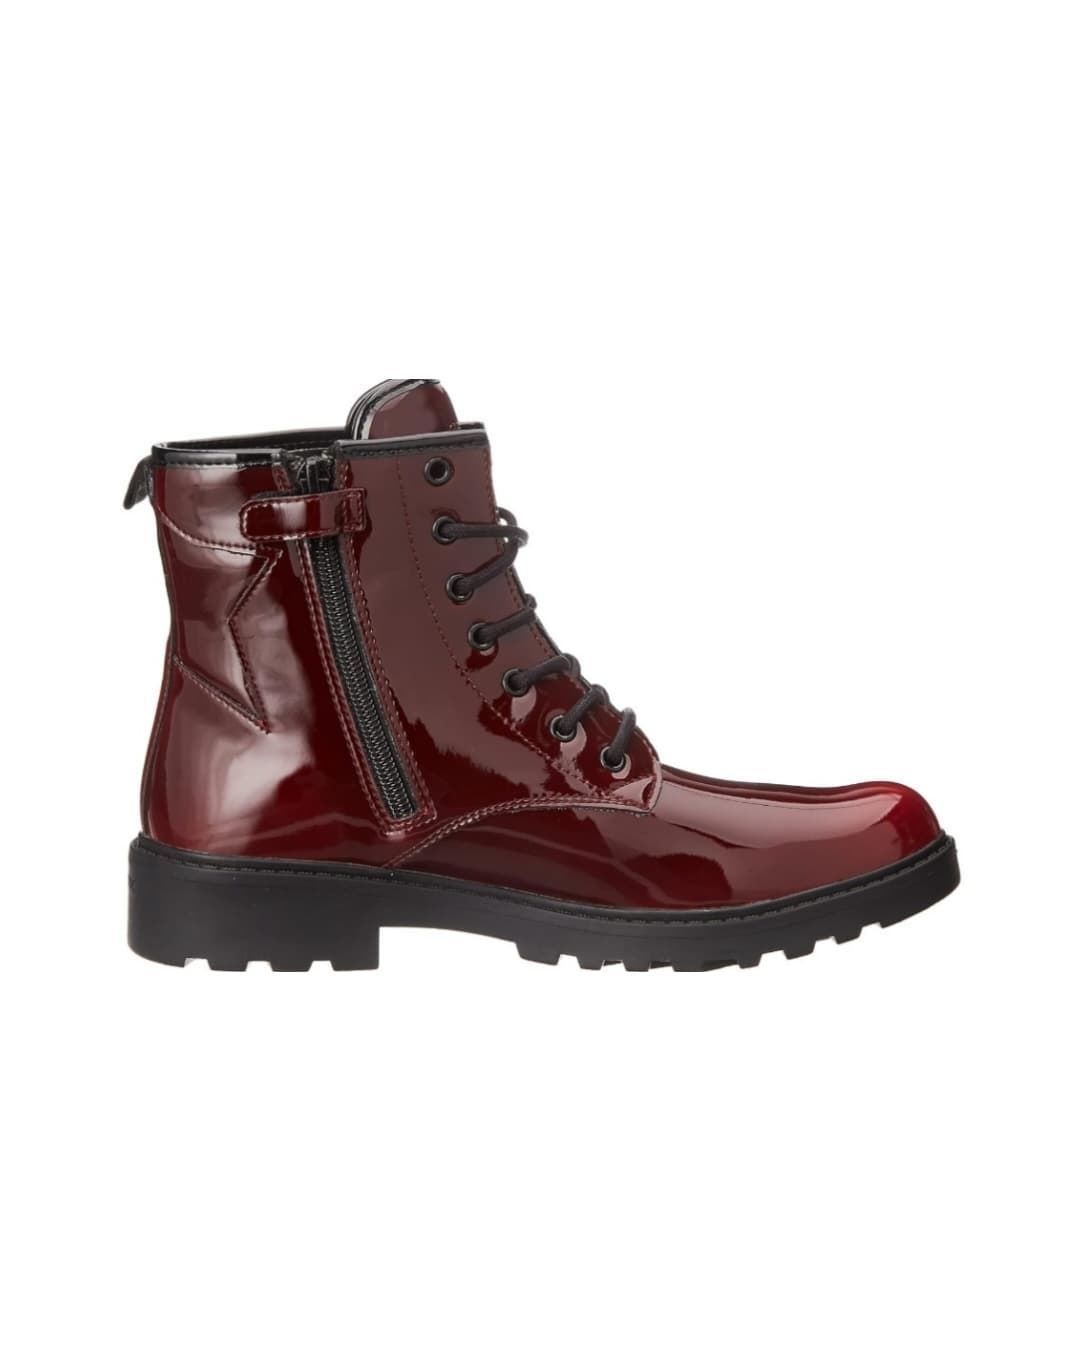 Geox Boots for girls Casey Patent Leather Burgundy - Image 2